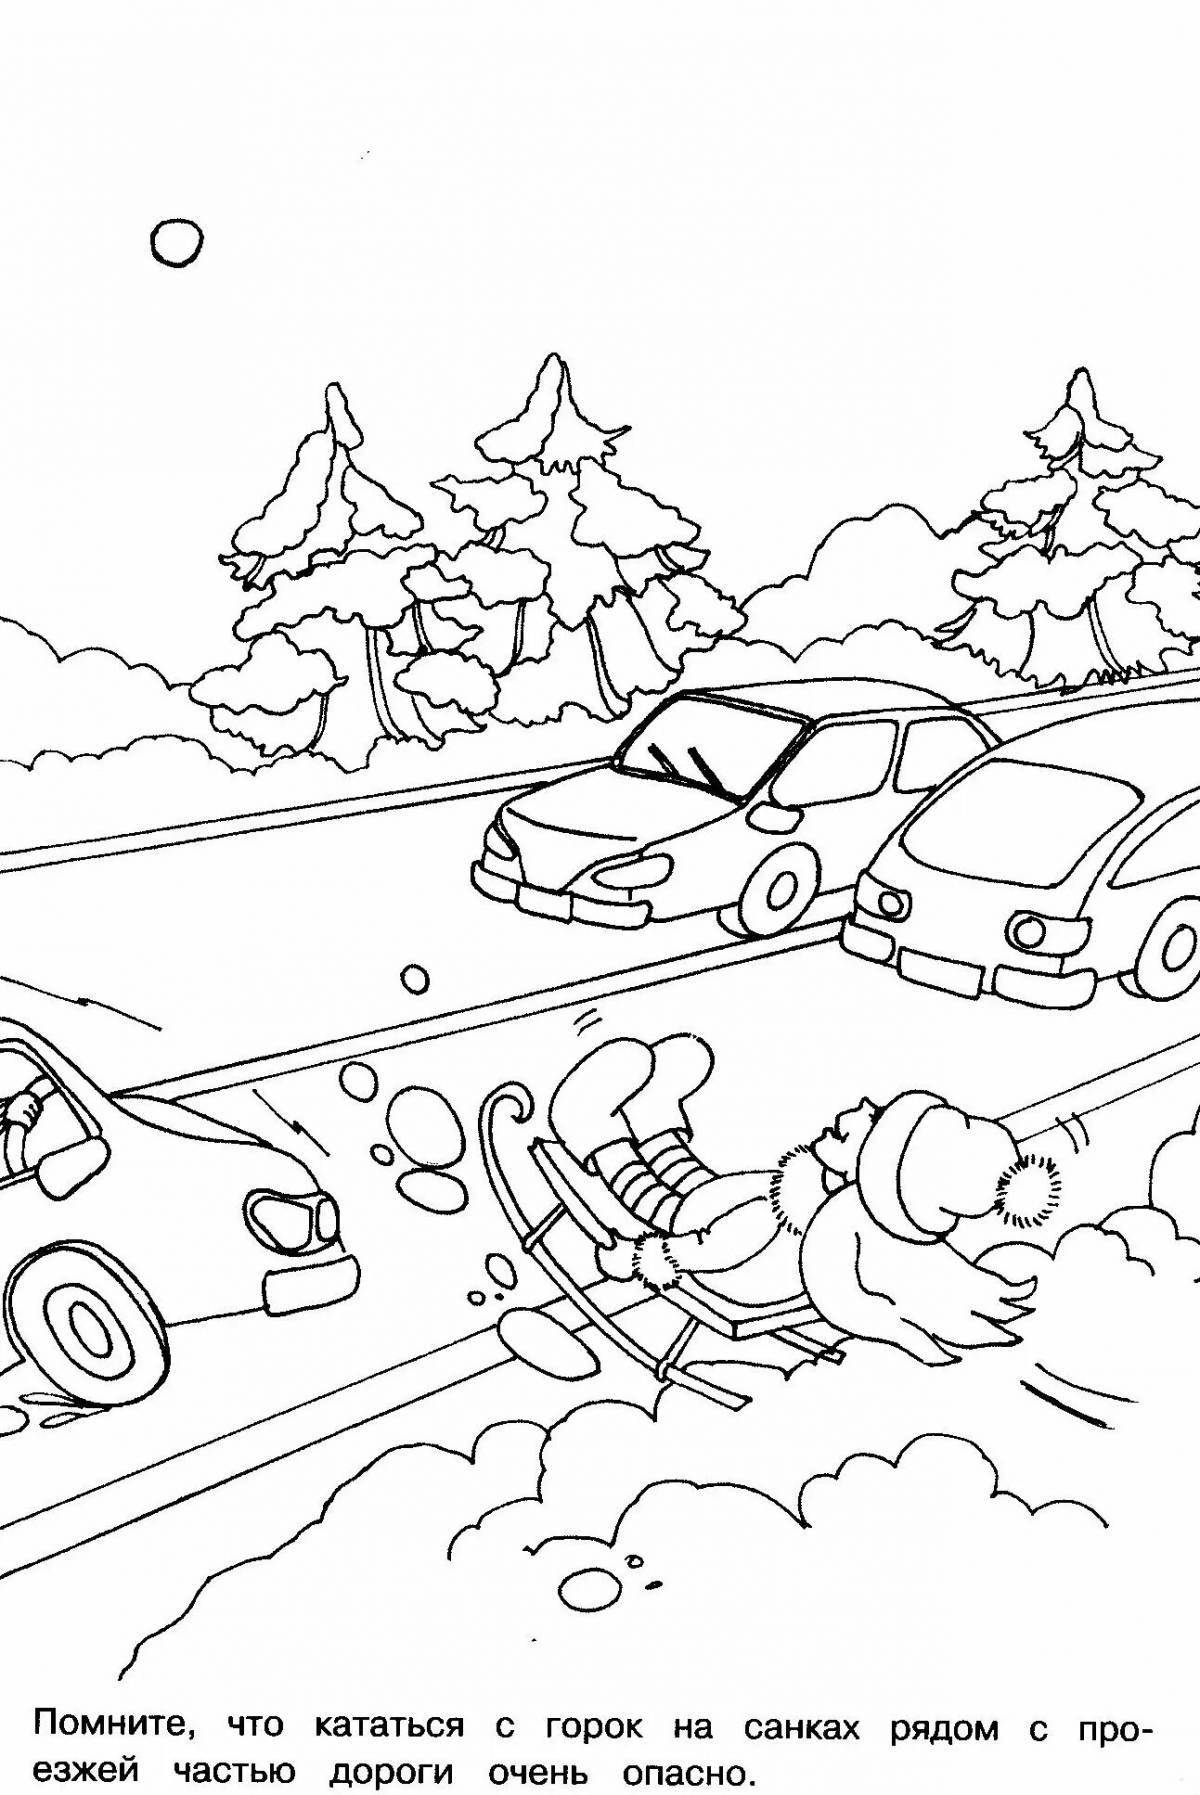 Fun rules of the road coloring book for kids